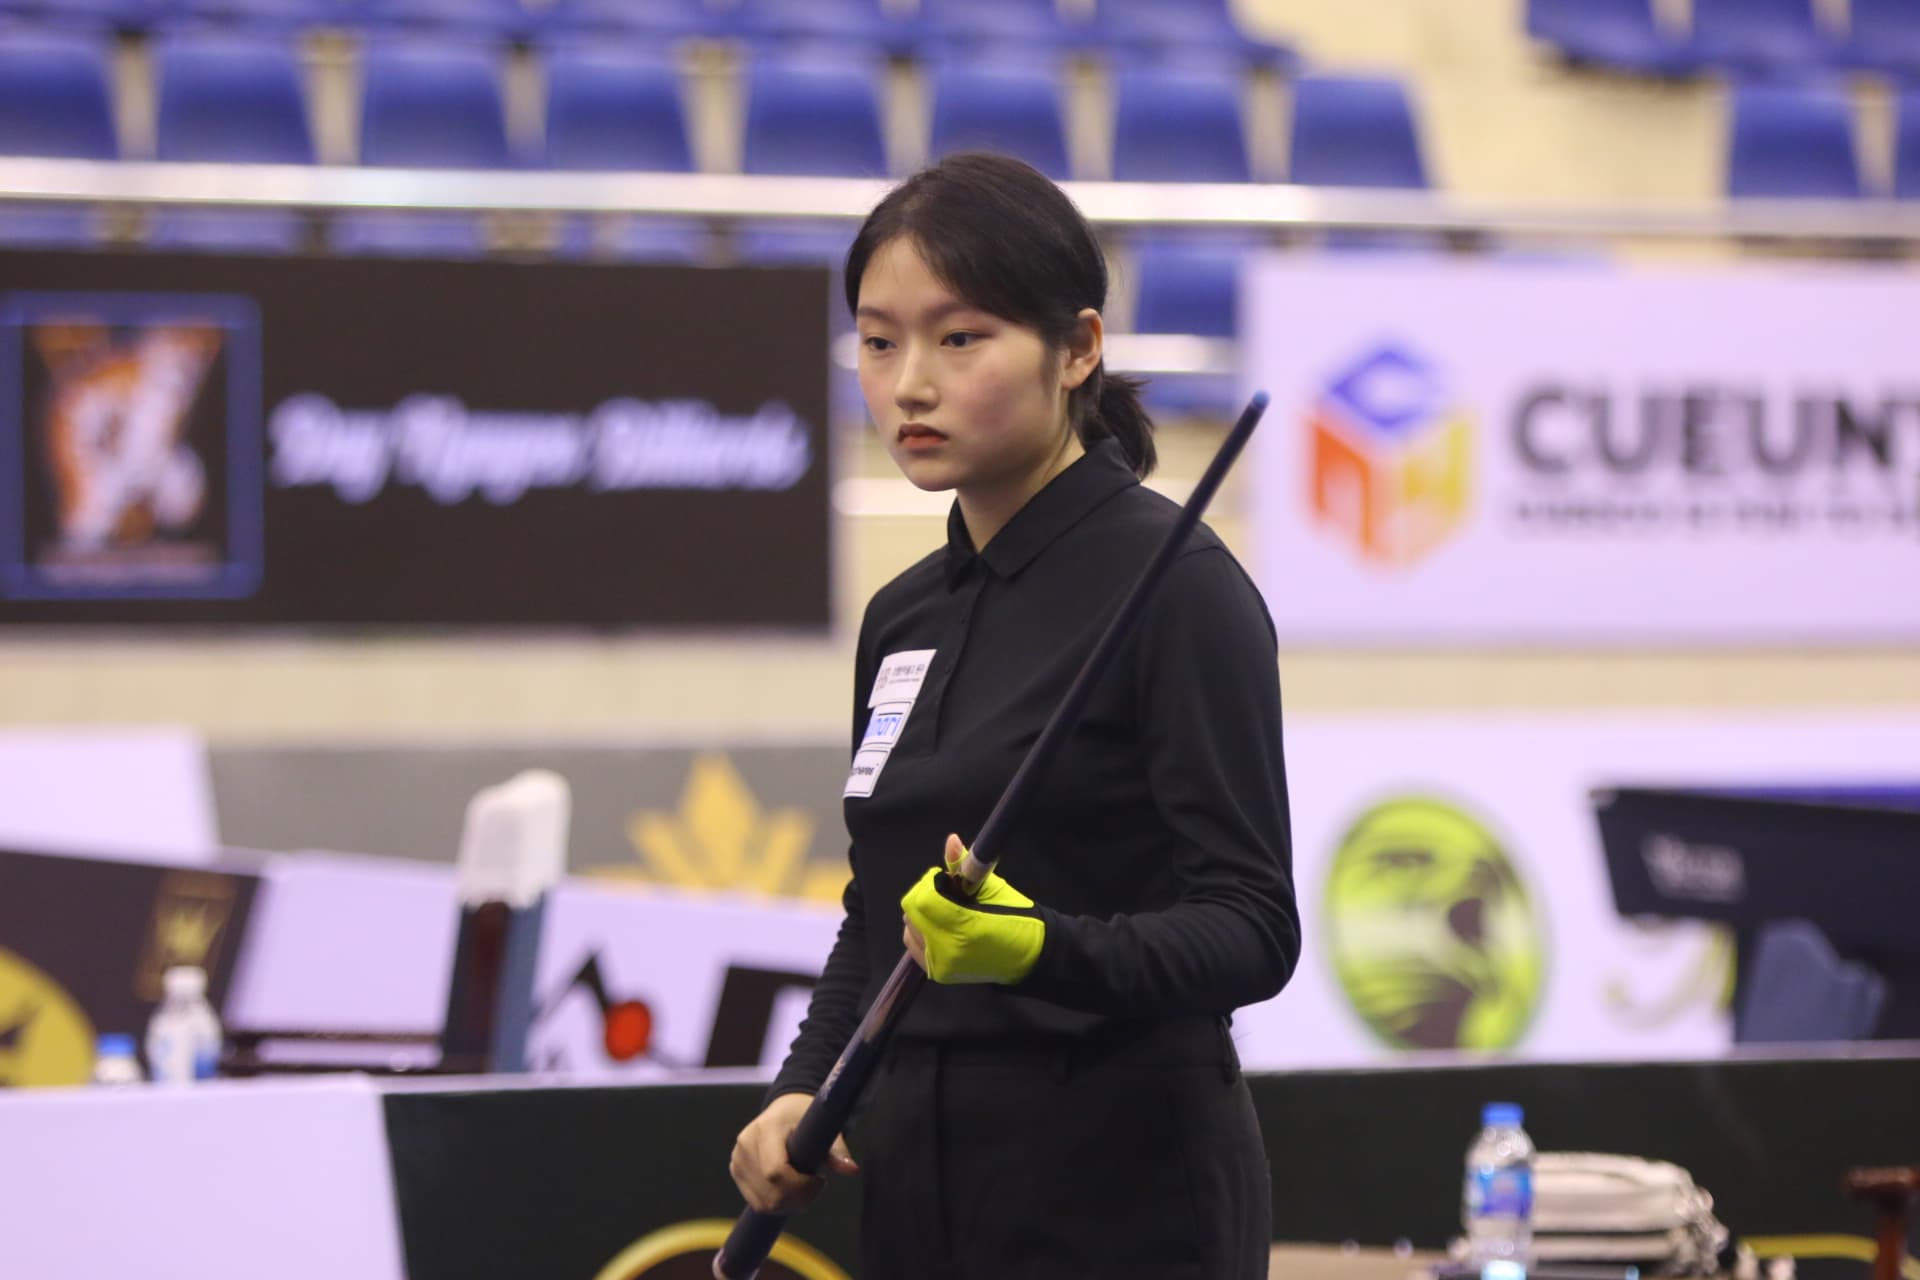 Han Ji Eun, 3rd place winner of the Cairo Prize at the 2022 Ho Chi Minh City World Cup